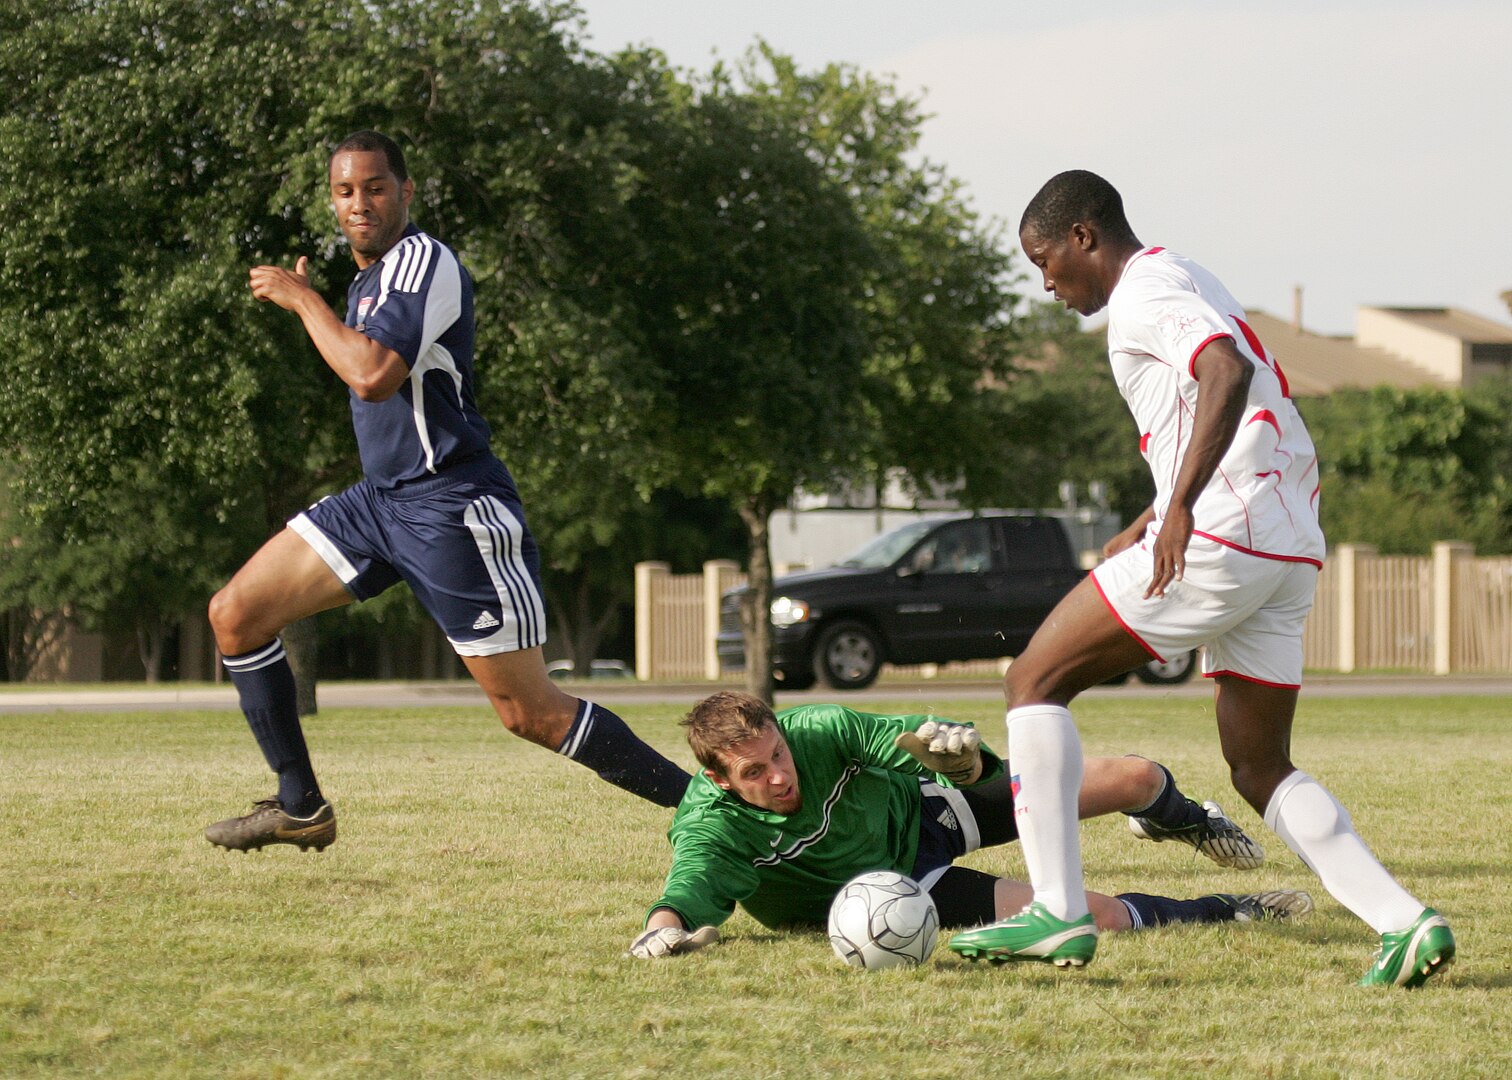 Warhawks goalie Chris Phillips and defender Andre Scott try to recover on a Haitian fast break April 26.